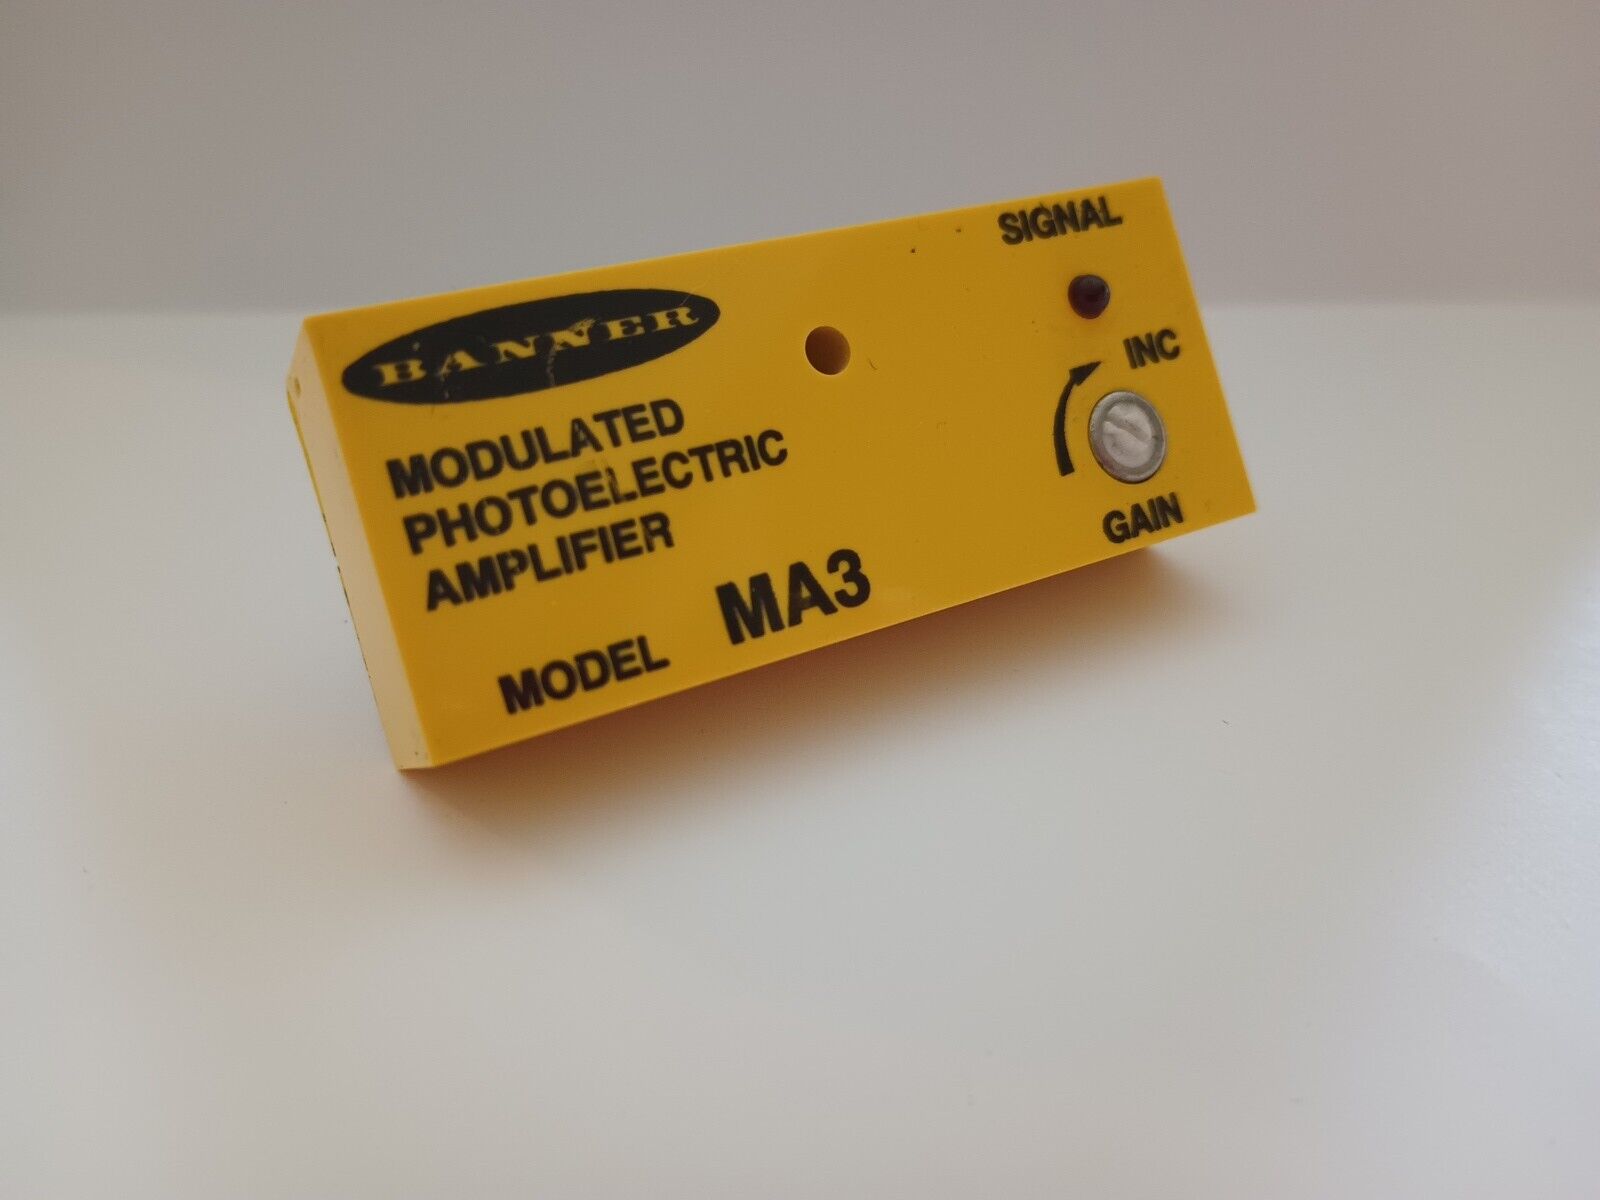 Banner Modulated Photoelectric Amplifier Model ma3